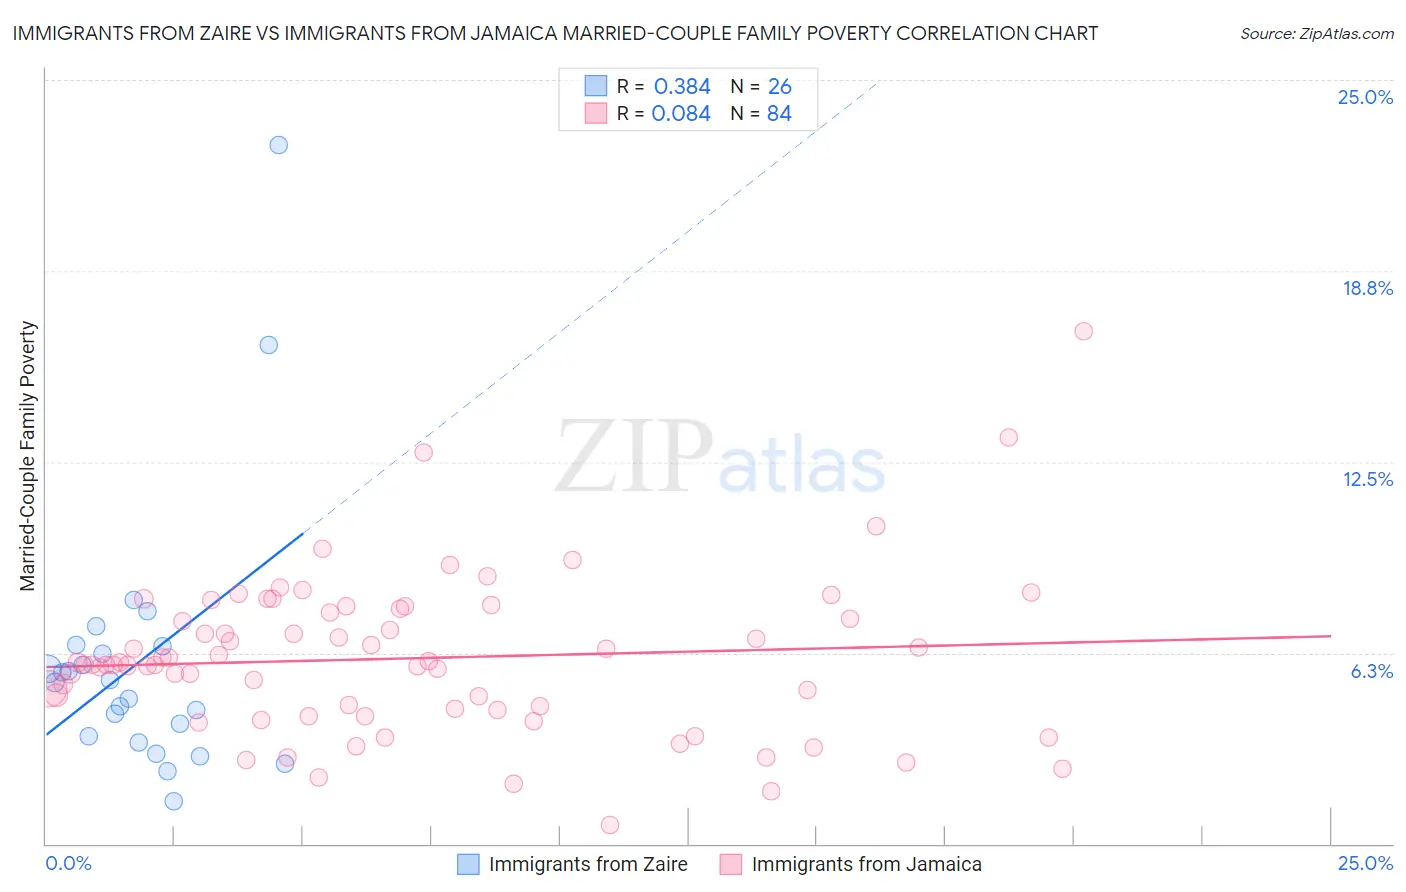 Immigrants from Zaire vs Immigrants from Jamaica Married-Couple Family Poverty